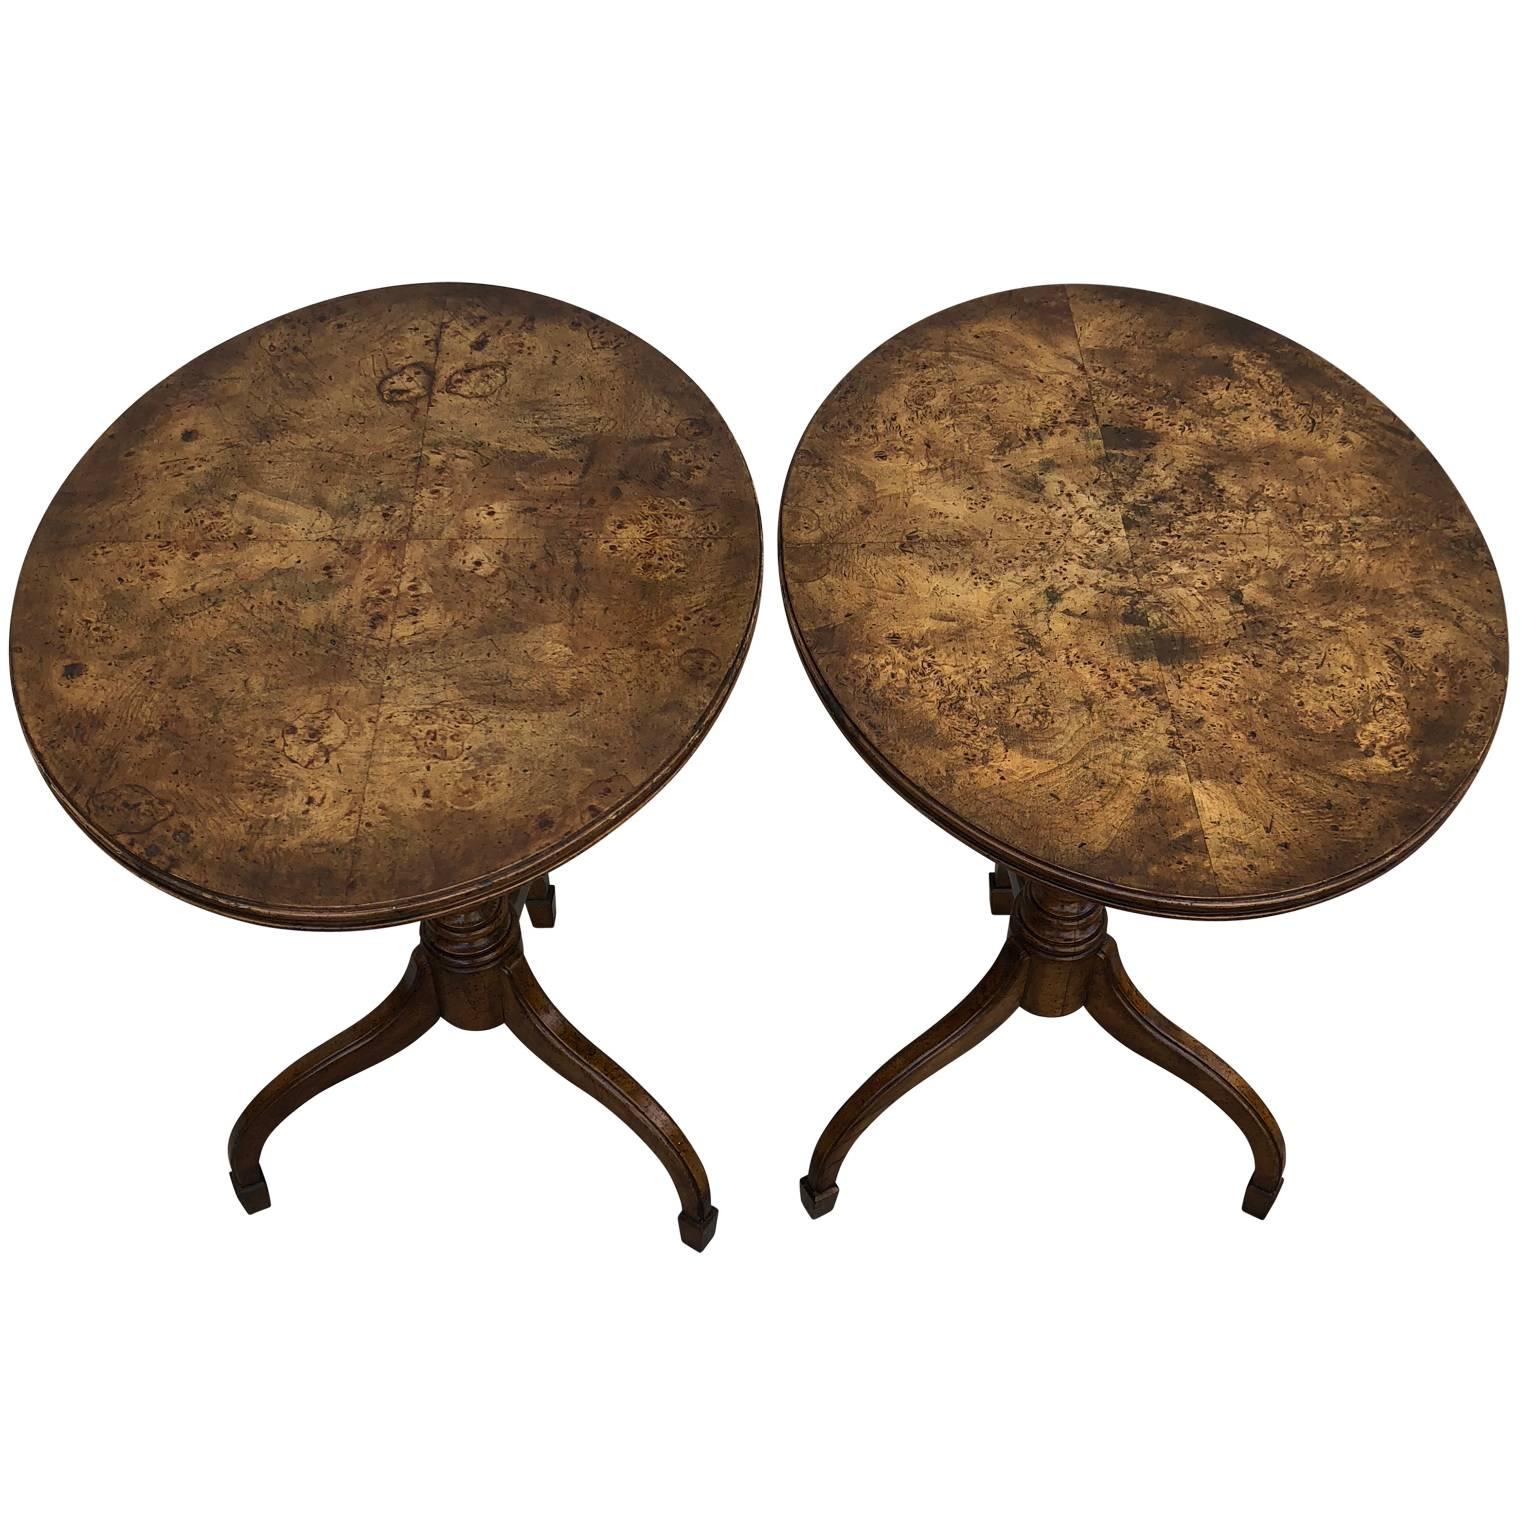 Pair of Mid-Century Modern Burl Wood Lamp or Side Tables by Weiman 2